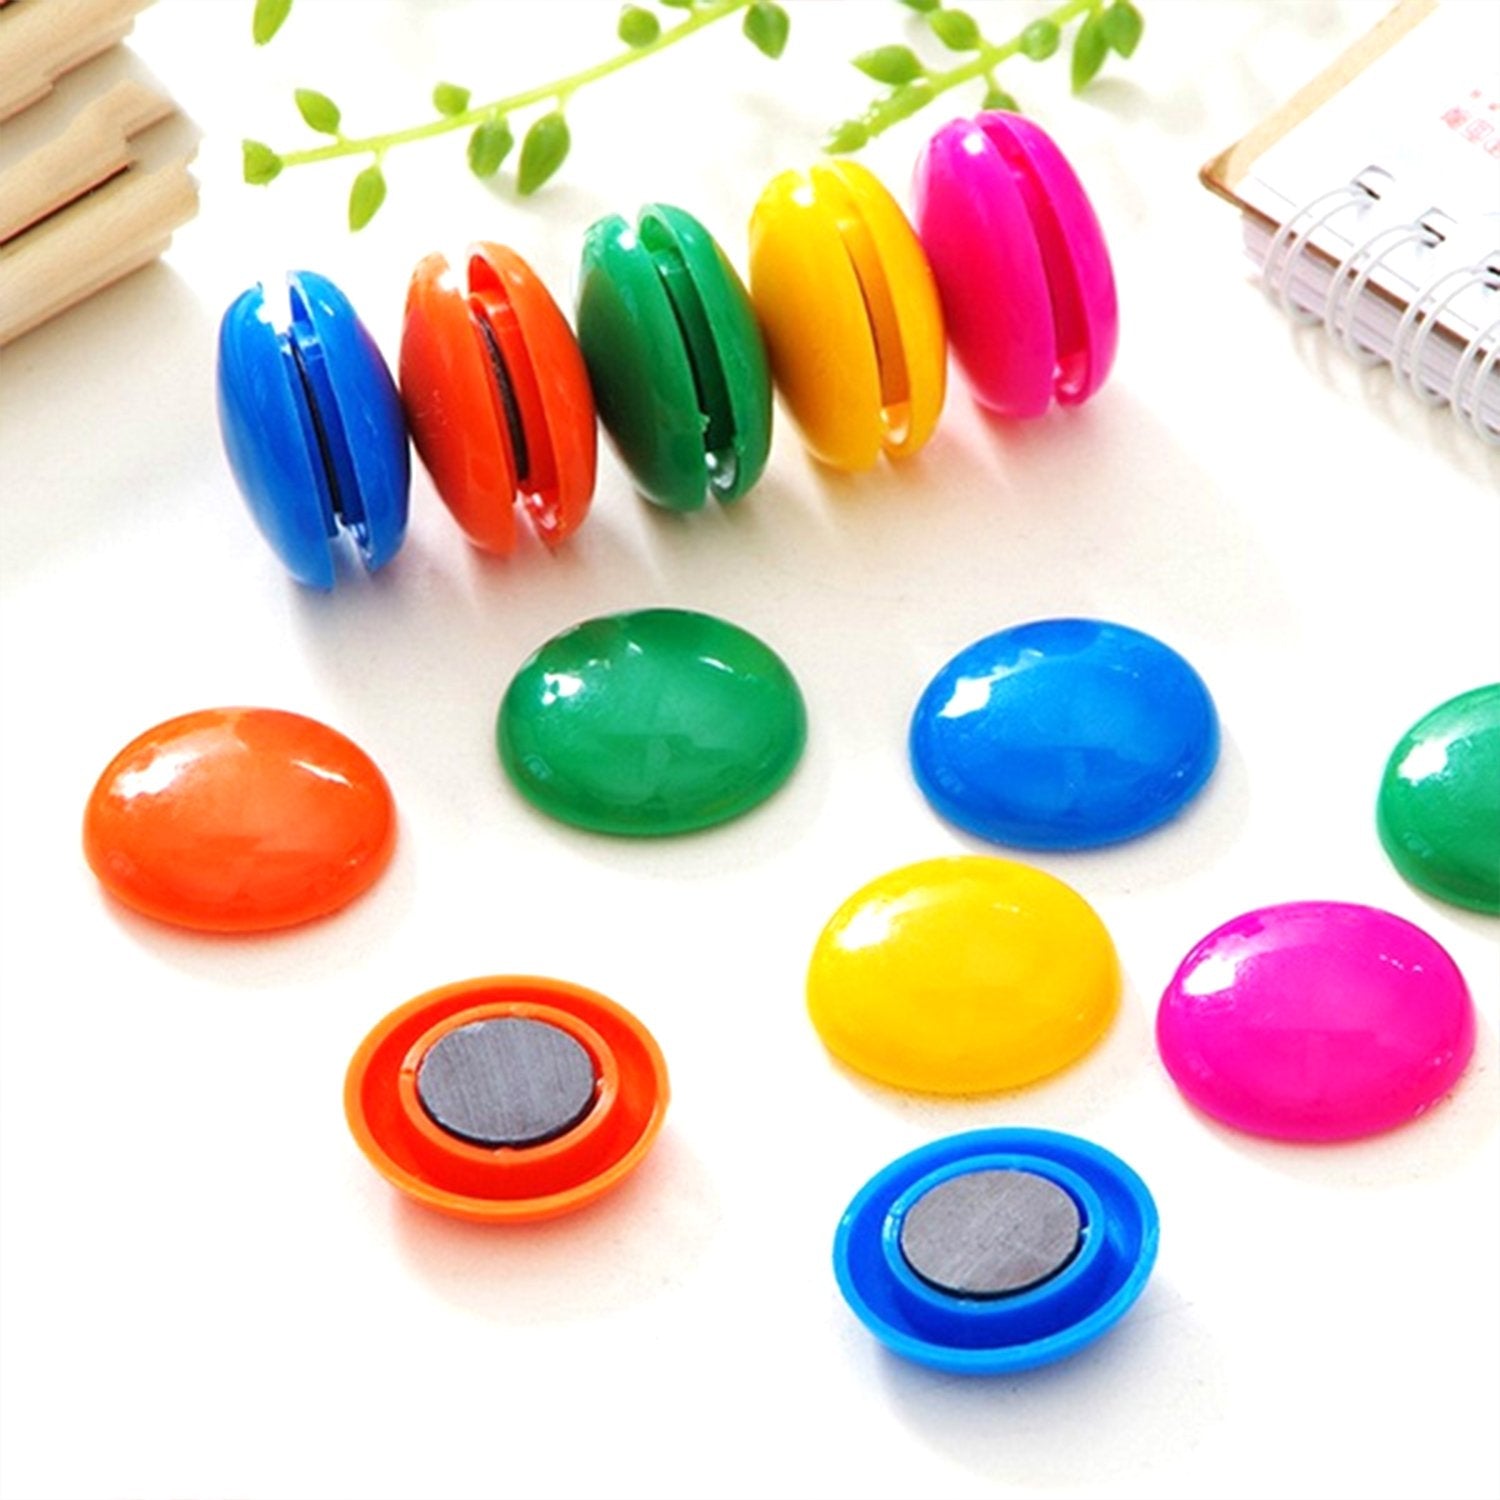 4676 Colorful Board Magnets Circular Plastic Buttons - SkyShopy